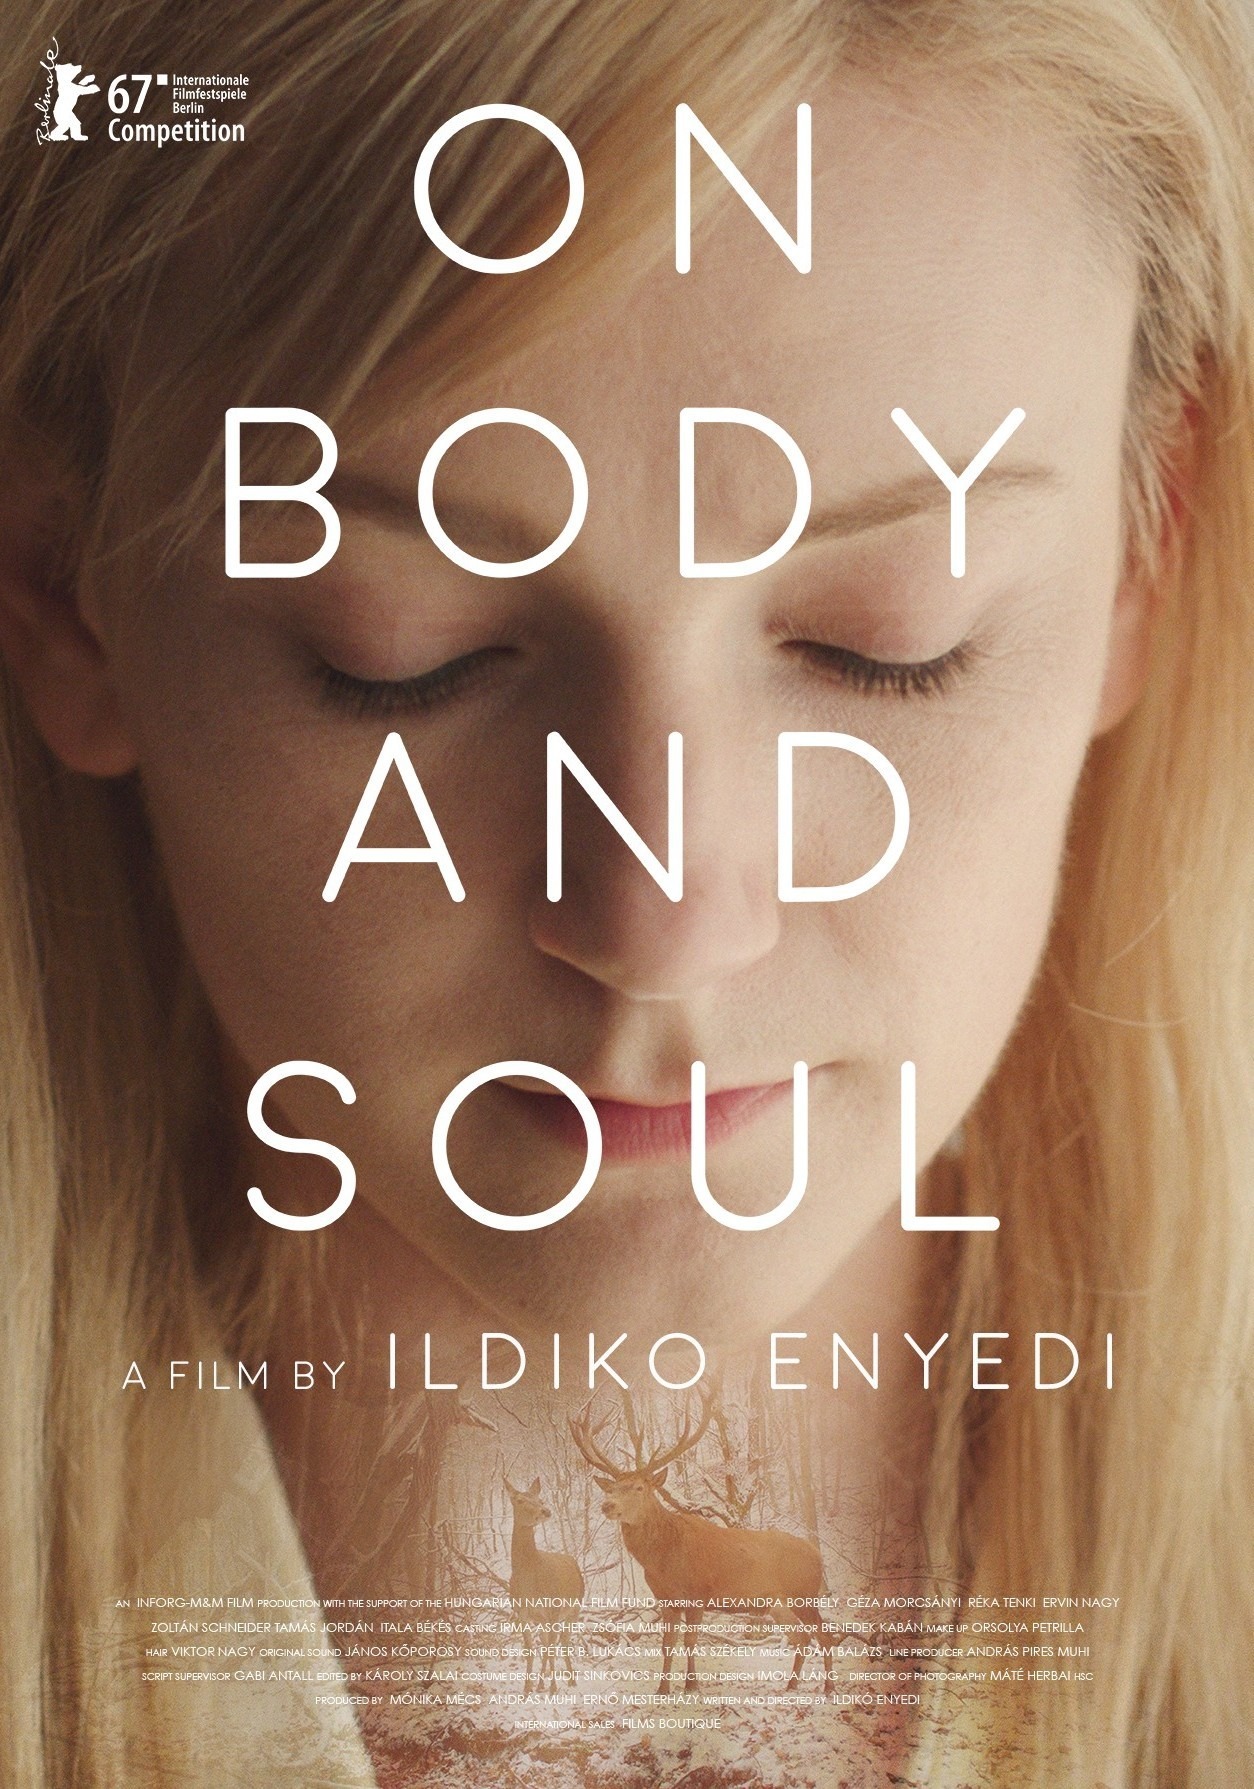  On Body and Soul (2017)-Best Movies to watch on Netflix